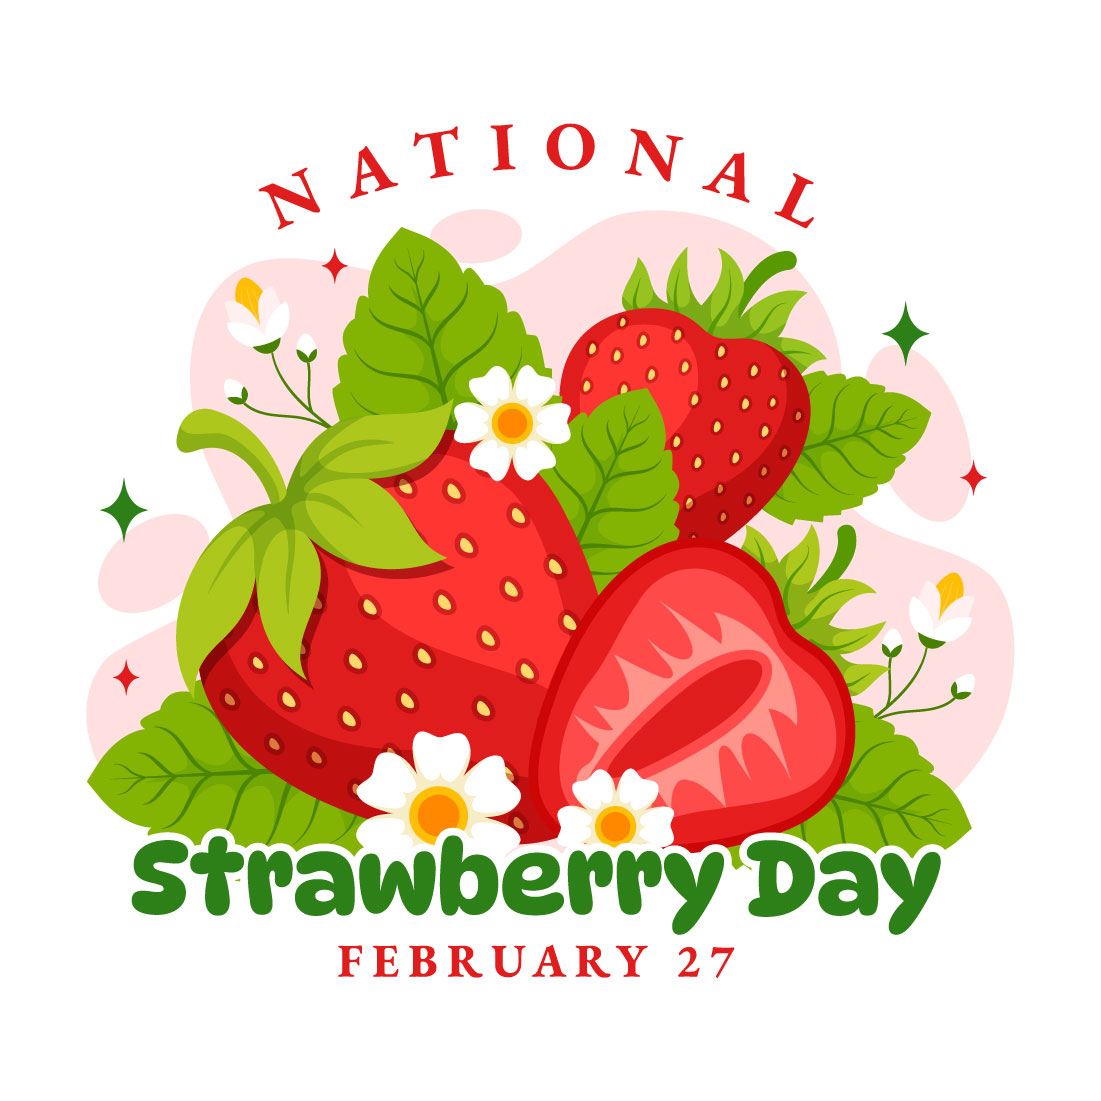 12 National Strawberry Day Illustration cover image.